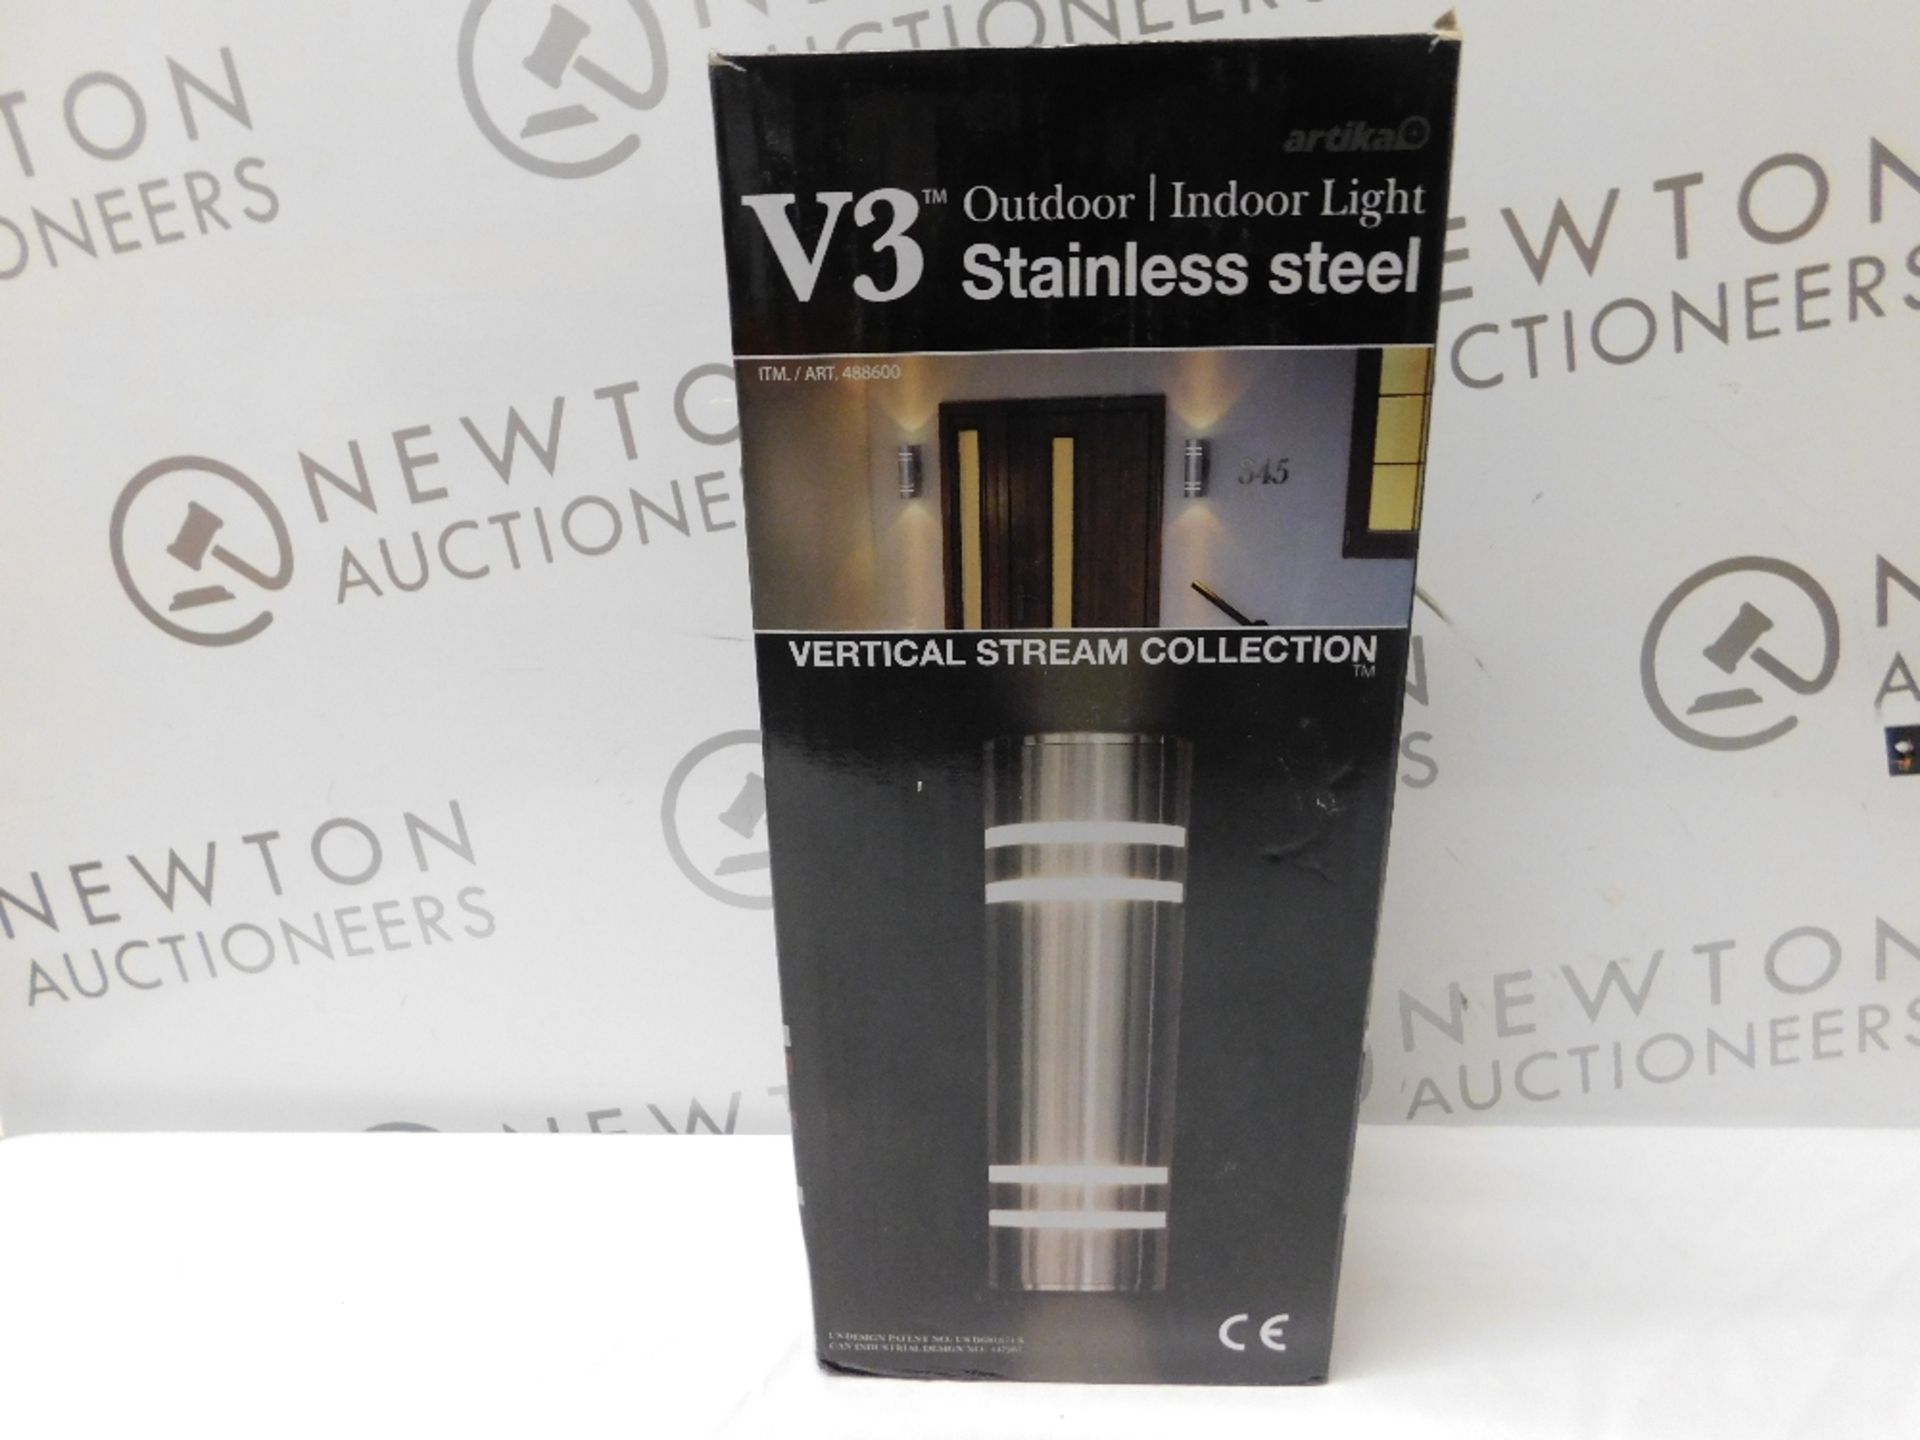 1 BOXED ARTIKA V3 OUTDOOR/ INDOOR STAINLESS STEEL VERTICAL STREAM COLLECTION RRP £54.99